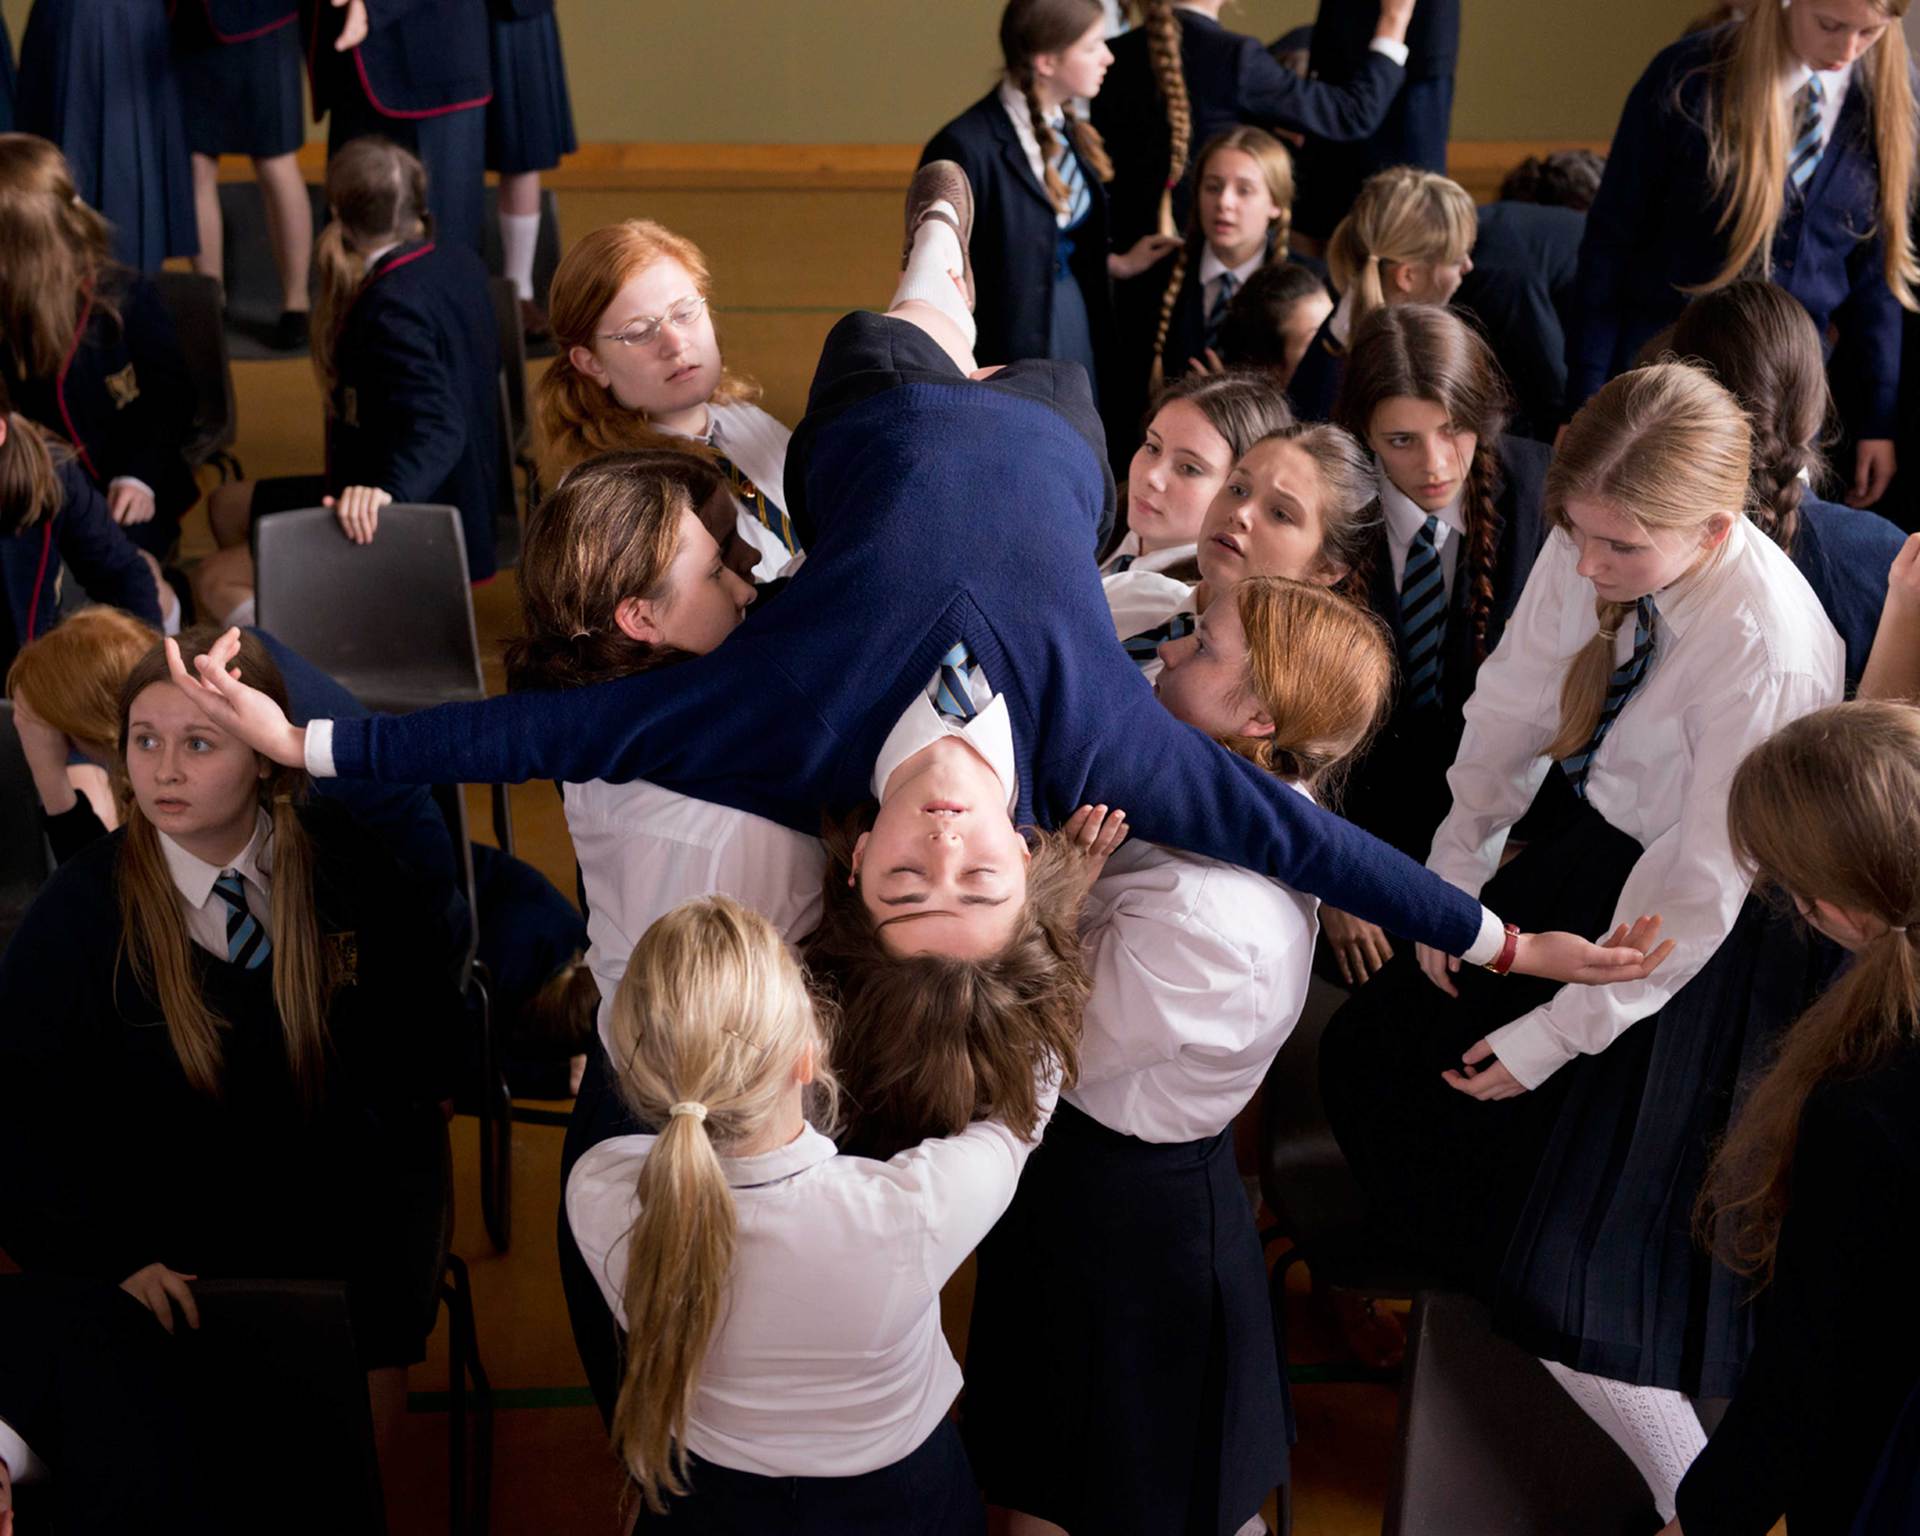 In the film, the school is seized by an epidemic of fainting among the girls